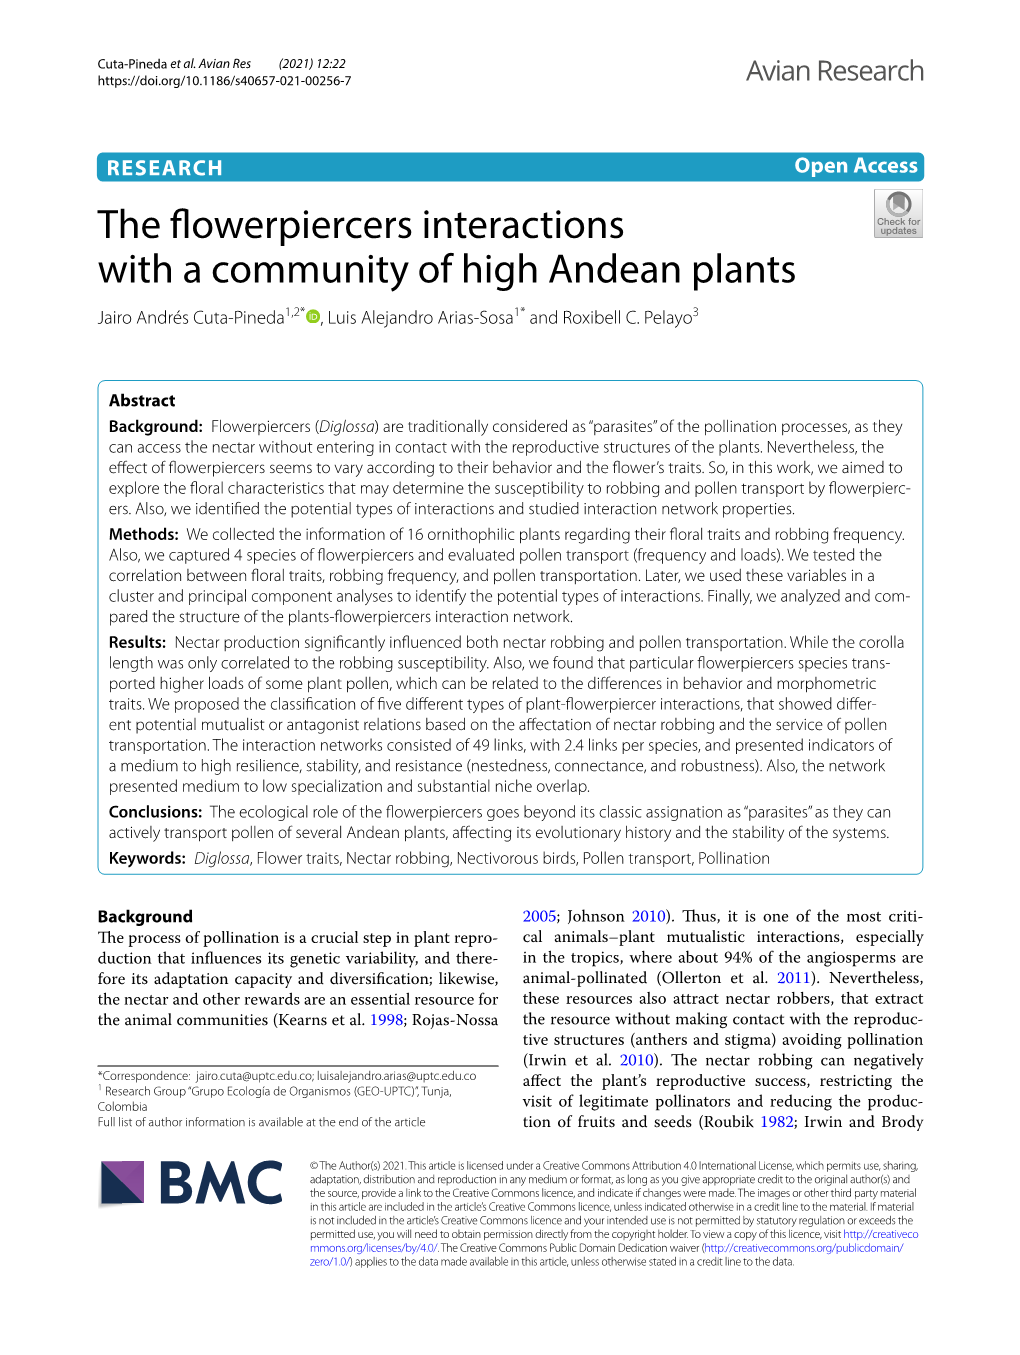 The Flowerpiercers Interactions with a Community of High Andean Plants